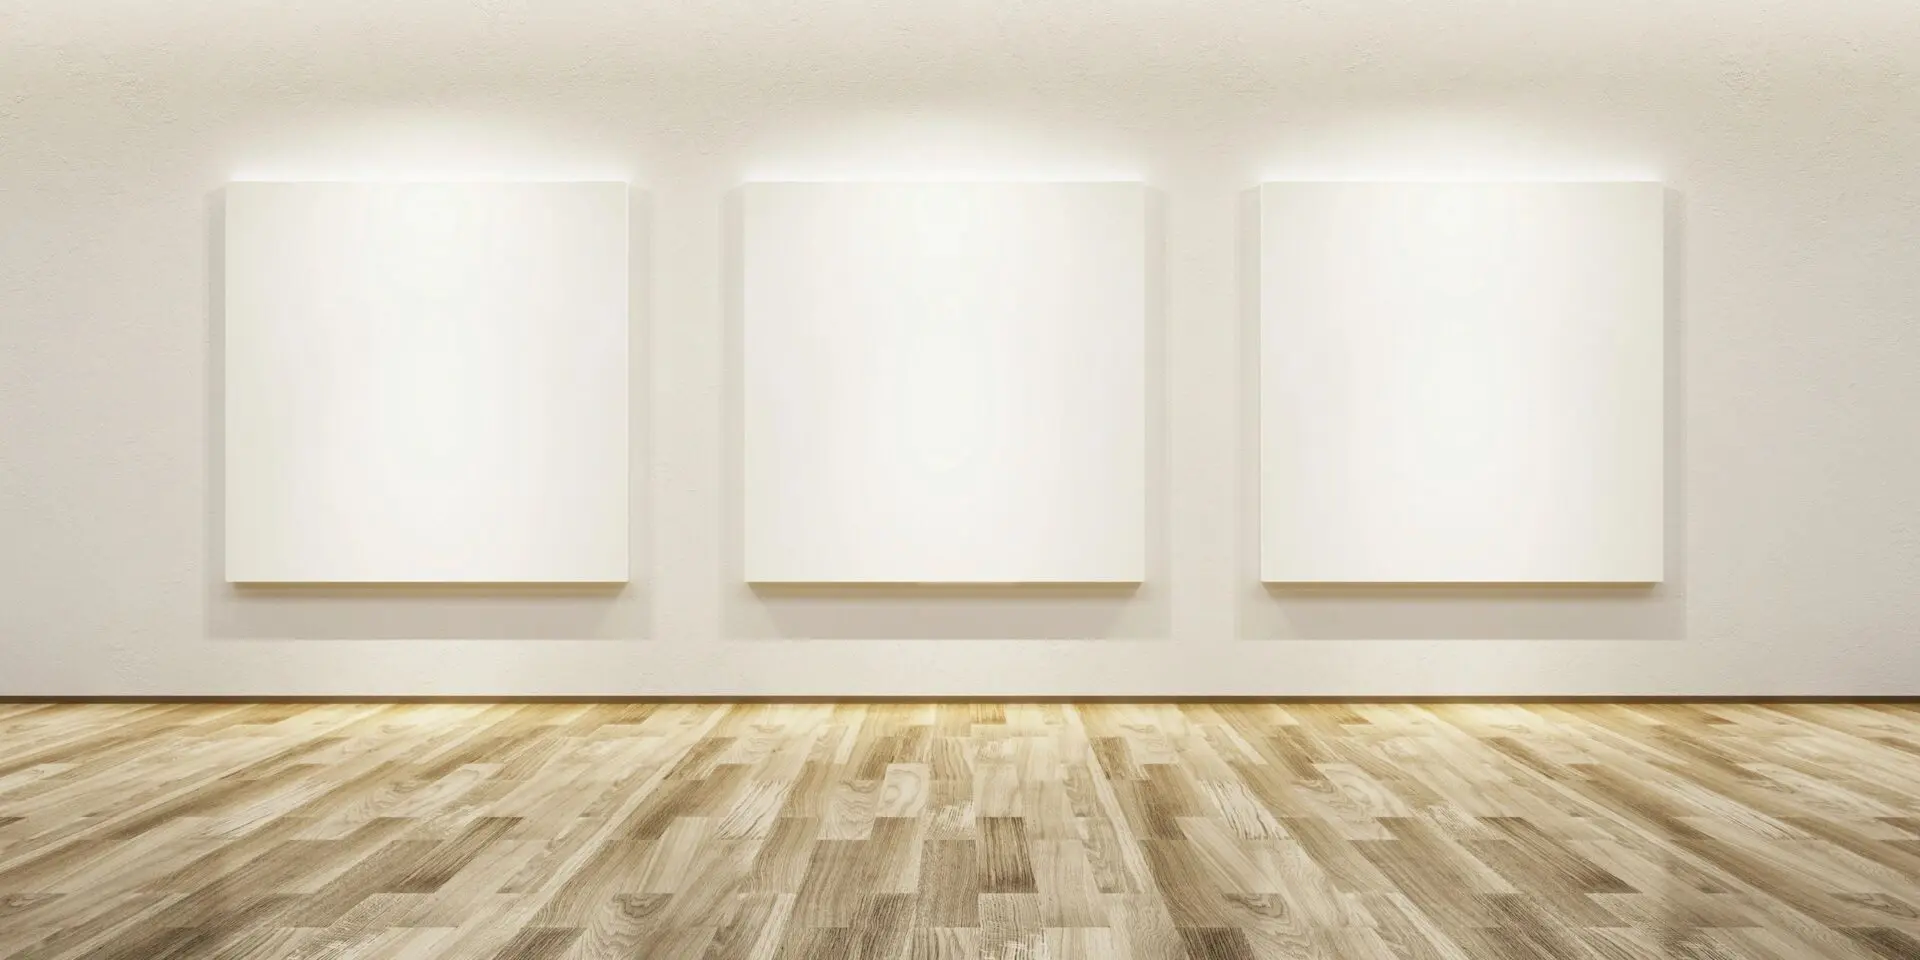 A room with three white canvases on the wall.